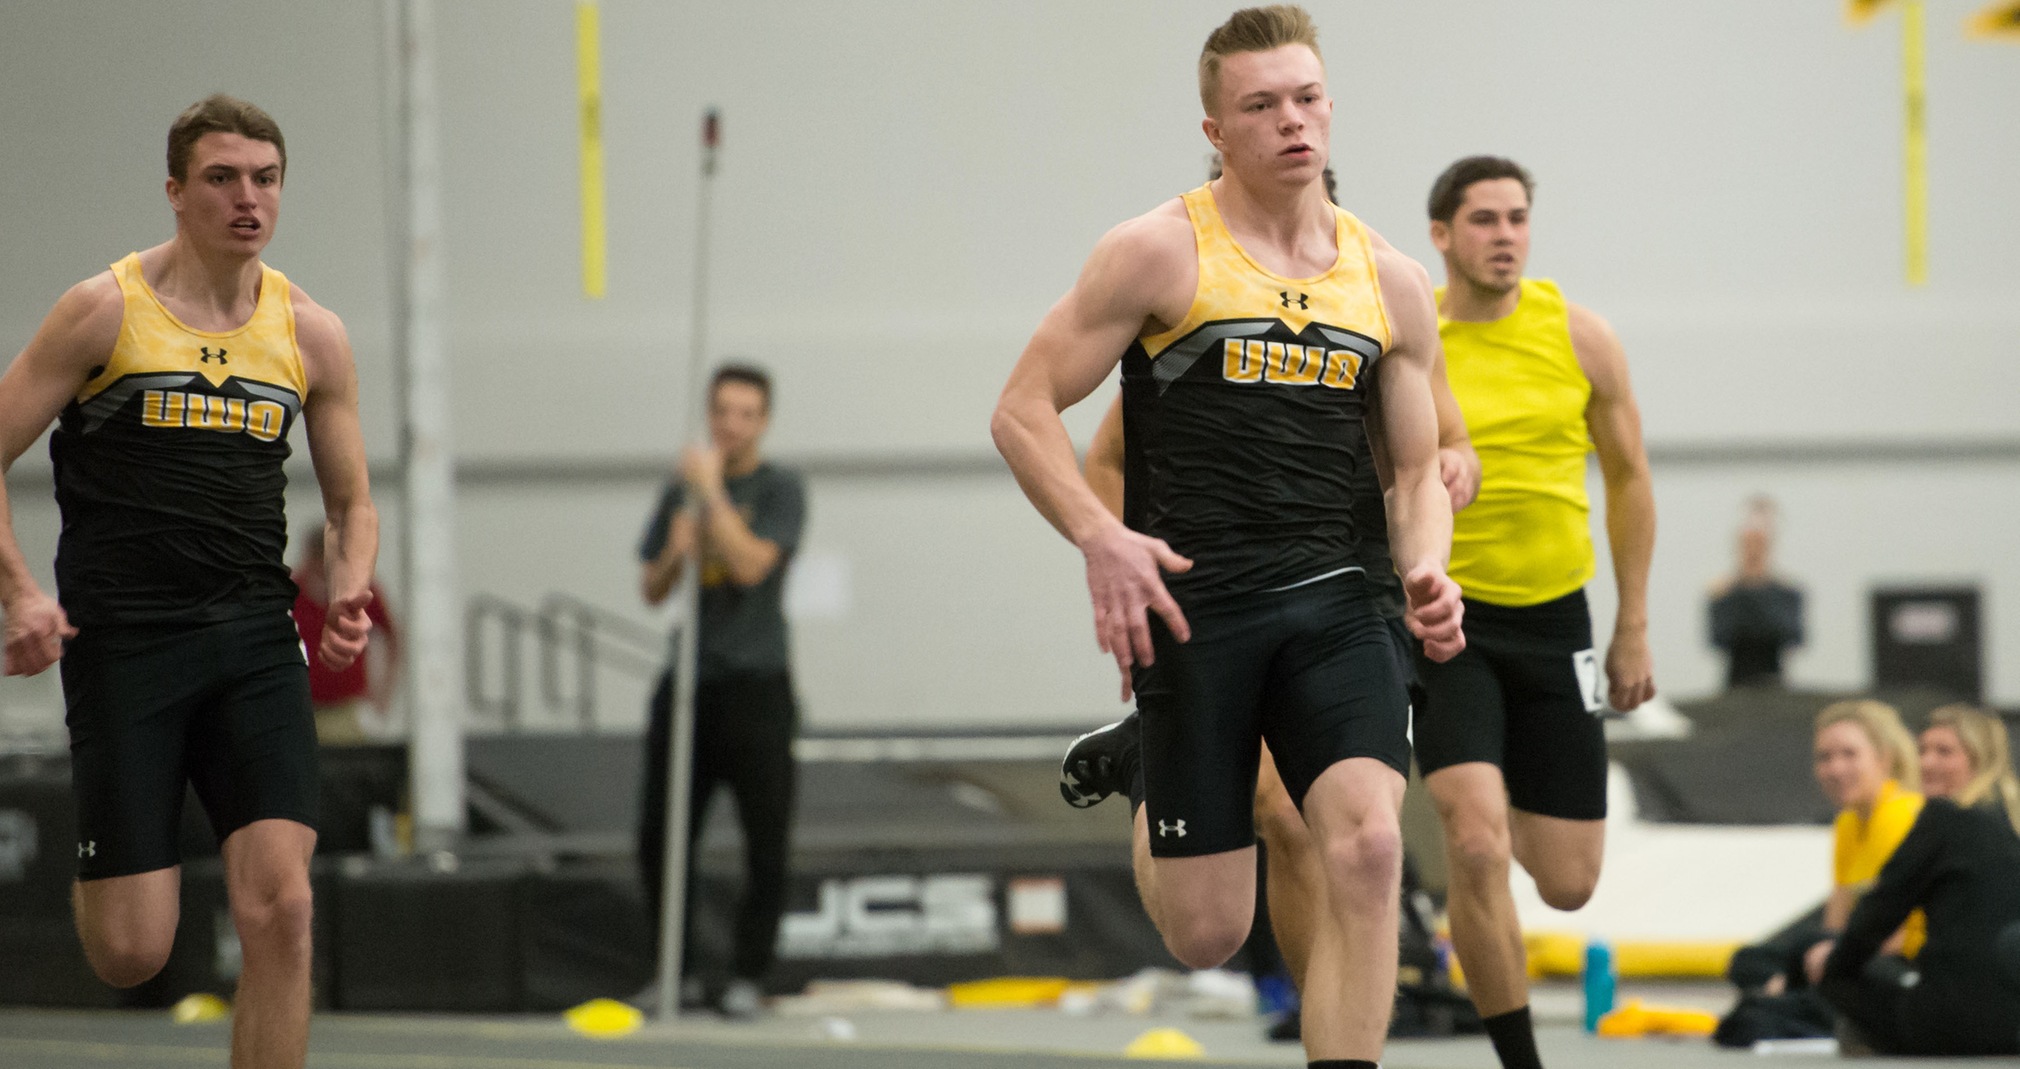 Erik Schwandt won the 60-meter dash and finished second at 200 meters.